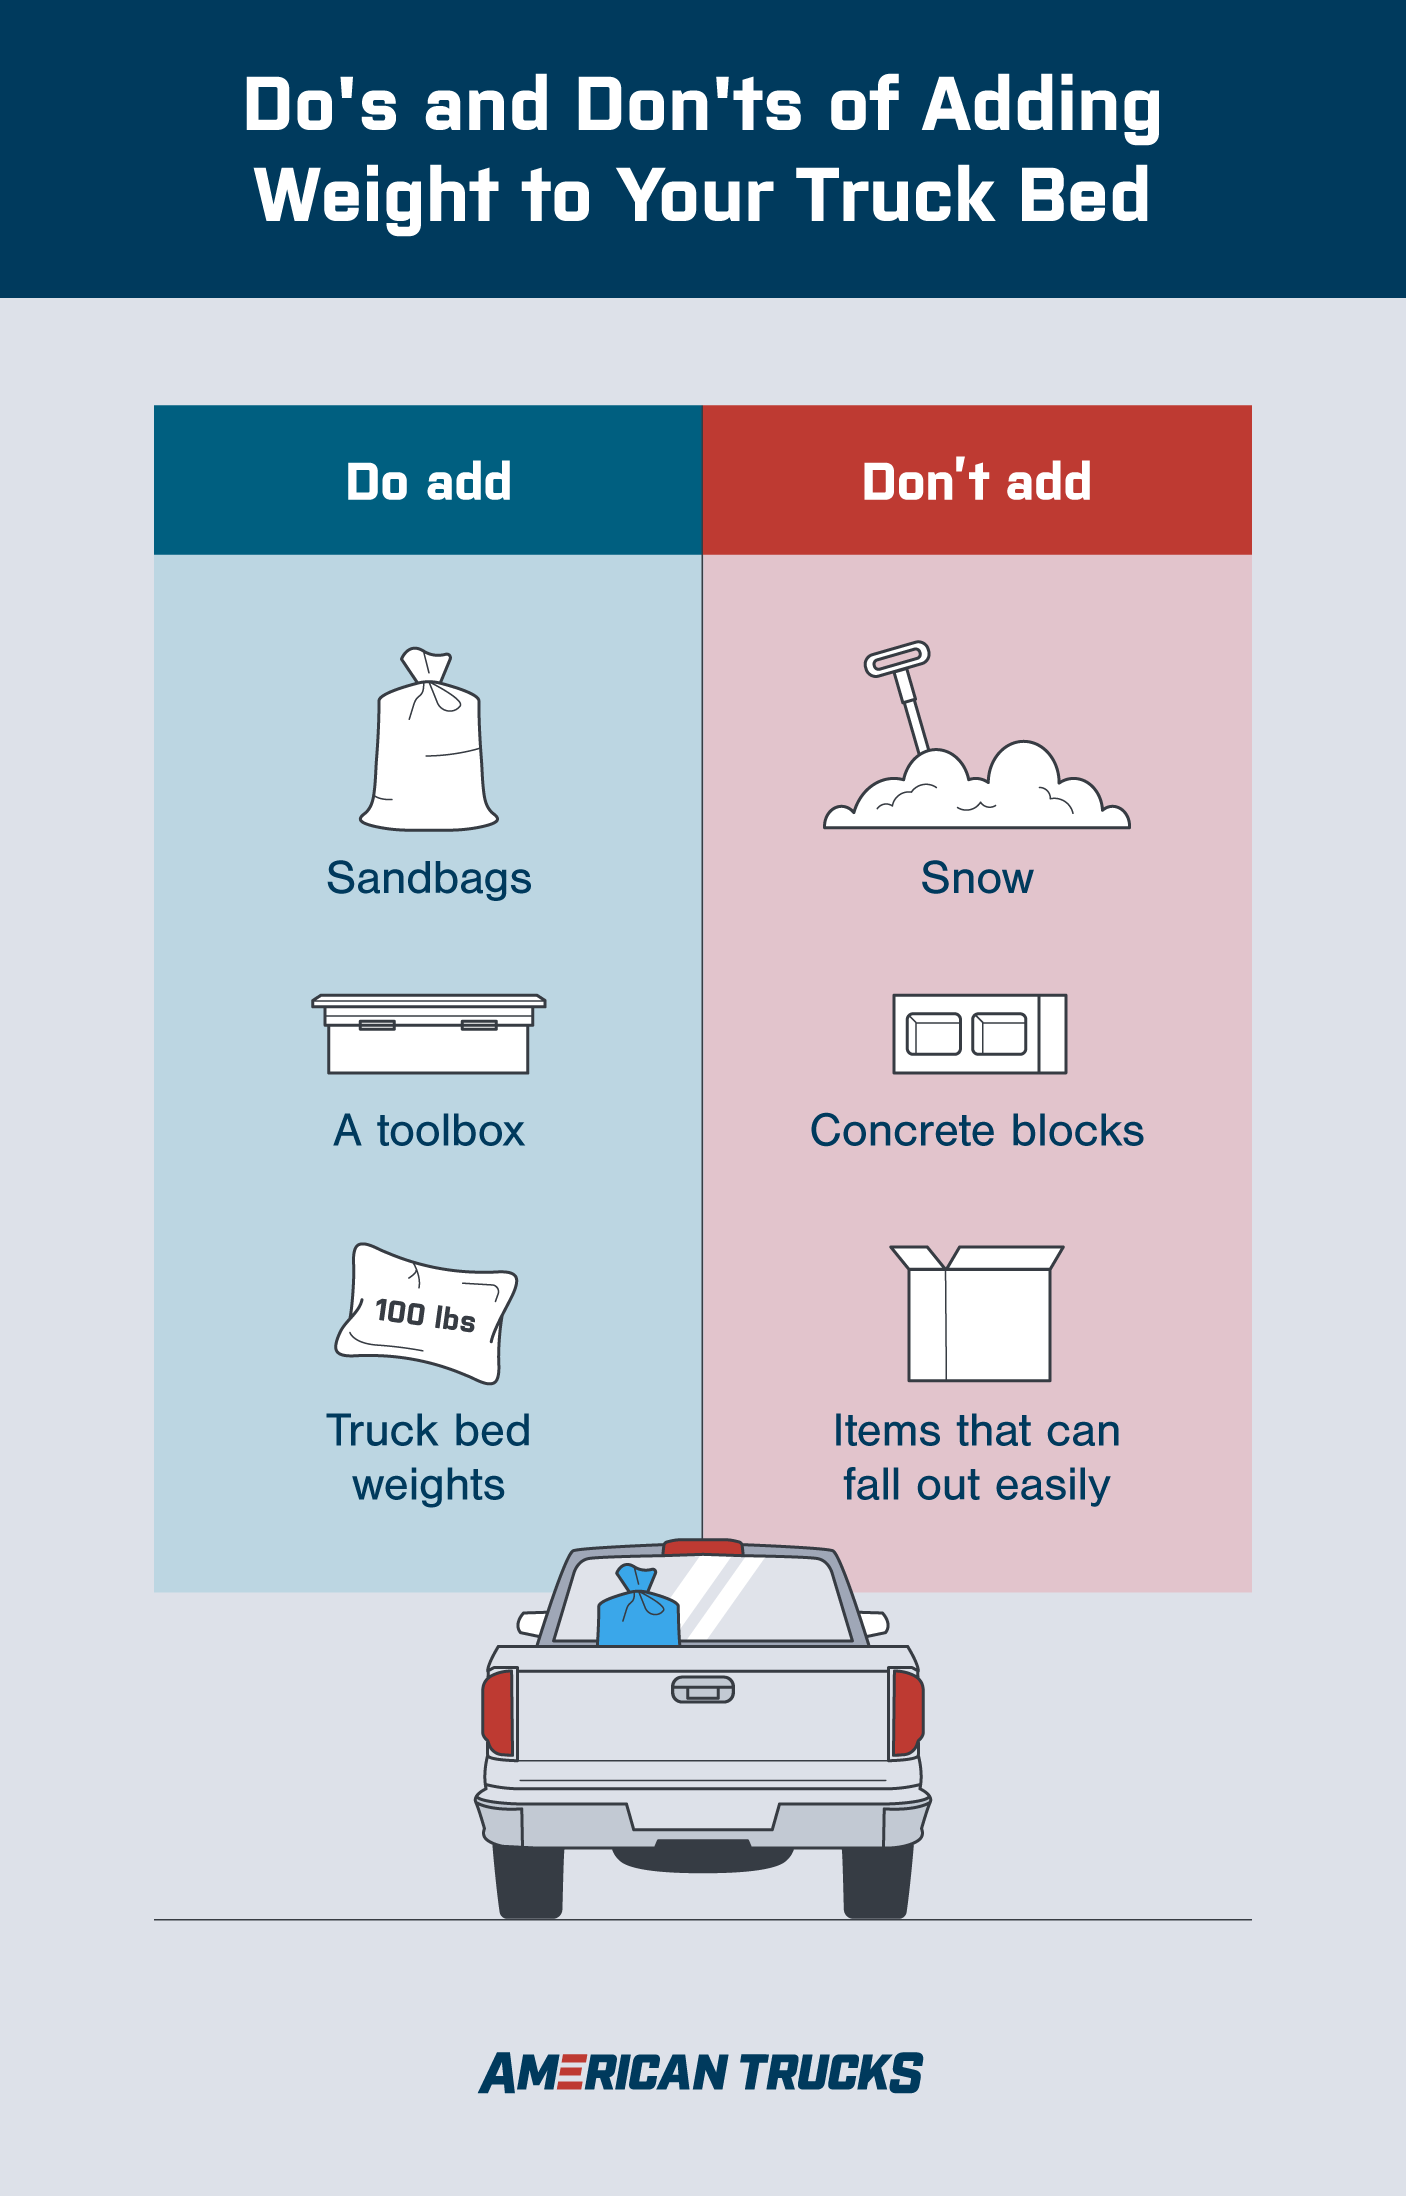 Graphic showing the do's and don'ts of adding weight to your truck bed. Do add sandbags, a toolbox, or truck bed weights. Don't add snow, concrete blocks, or items that can fall out easily.